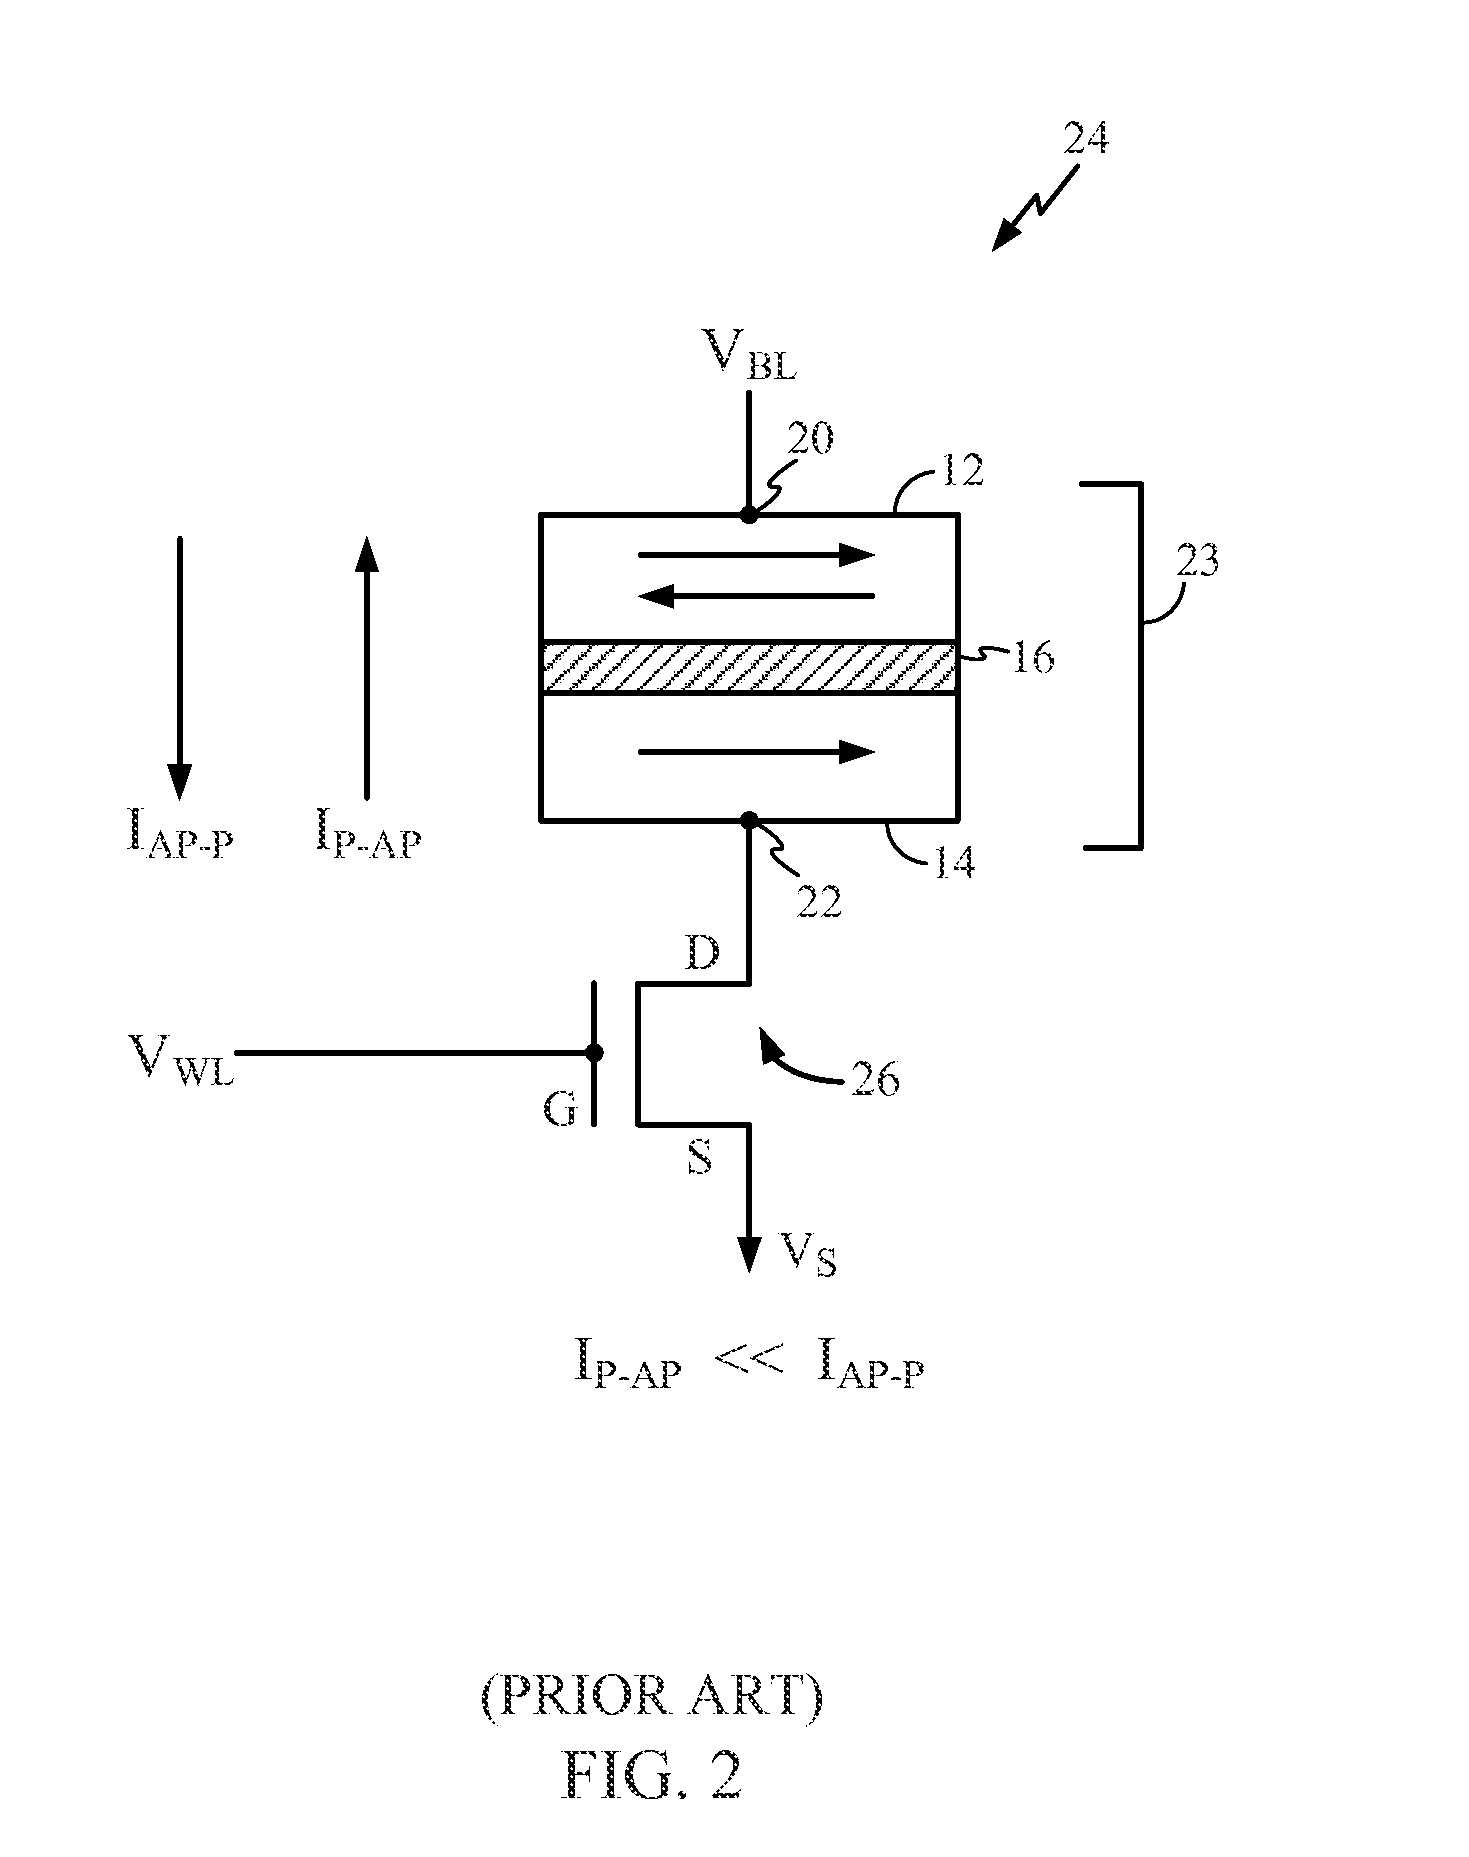 Spin Transistors Employing a Piezoelectric Layer and Related Memory, Memory Systems, and Methods